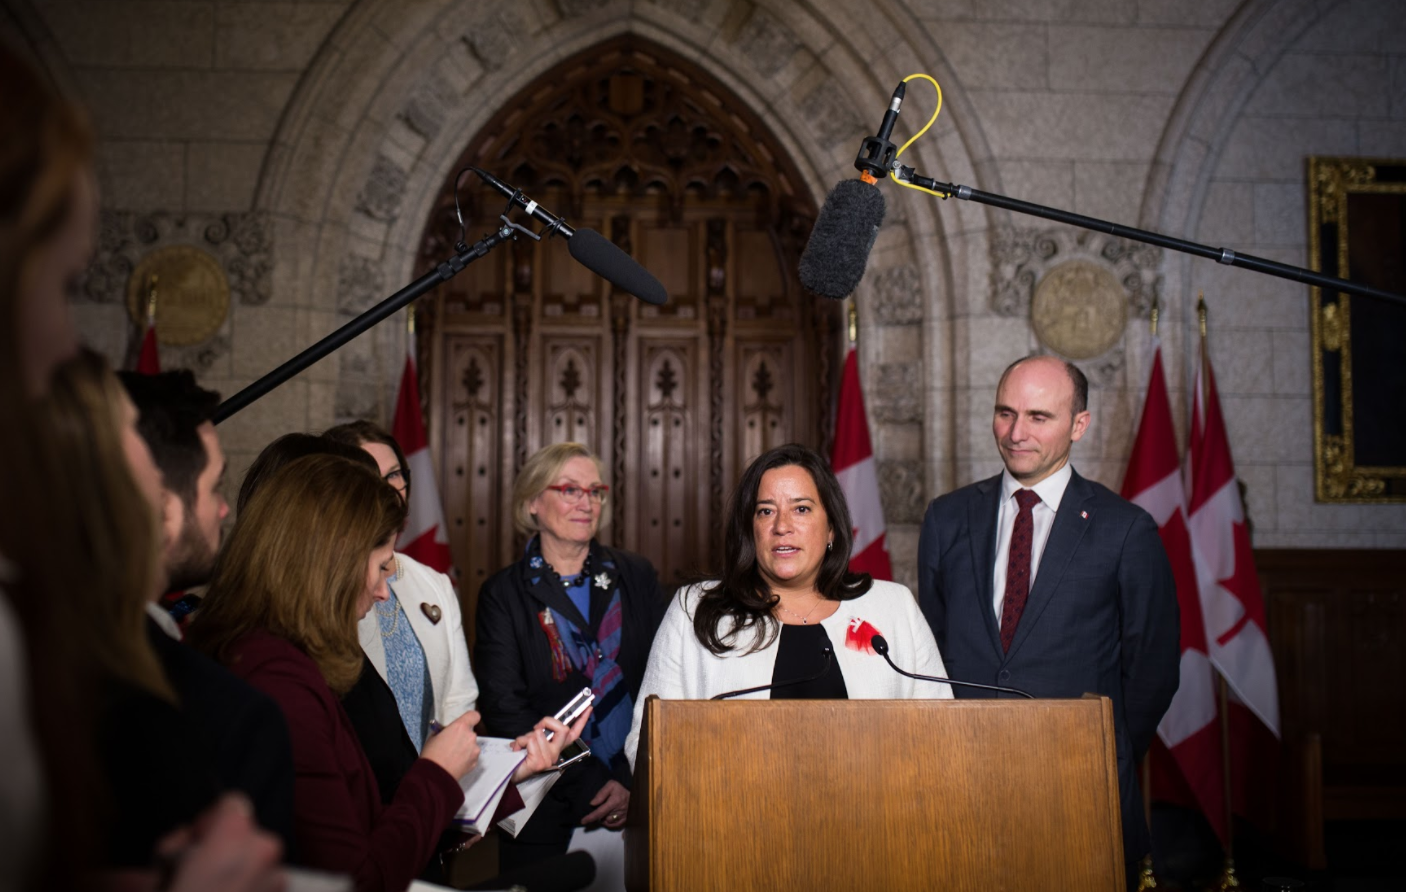 Jody Wilson Raybould S Legacy Lives On After Trudeau S Cabinet